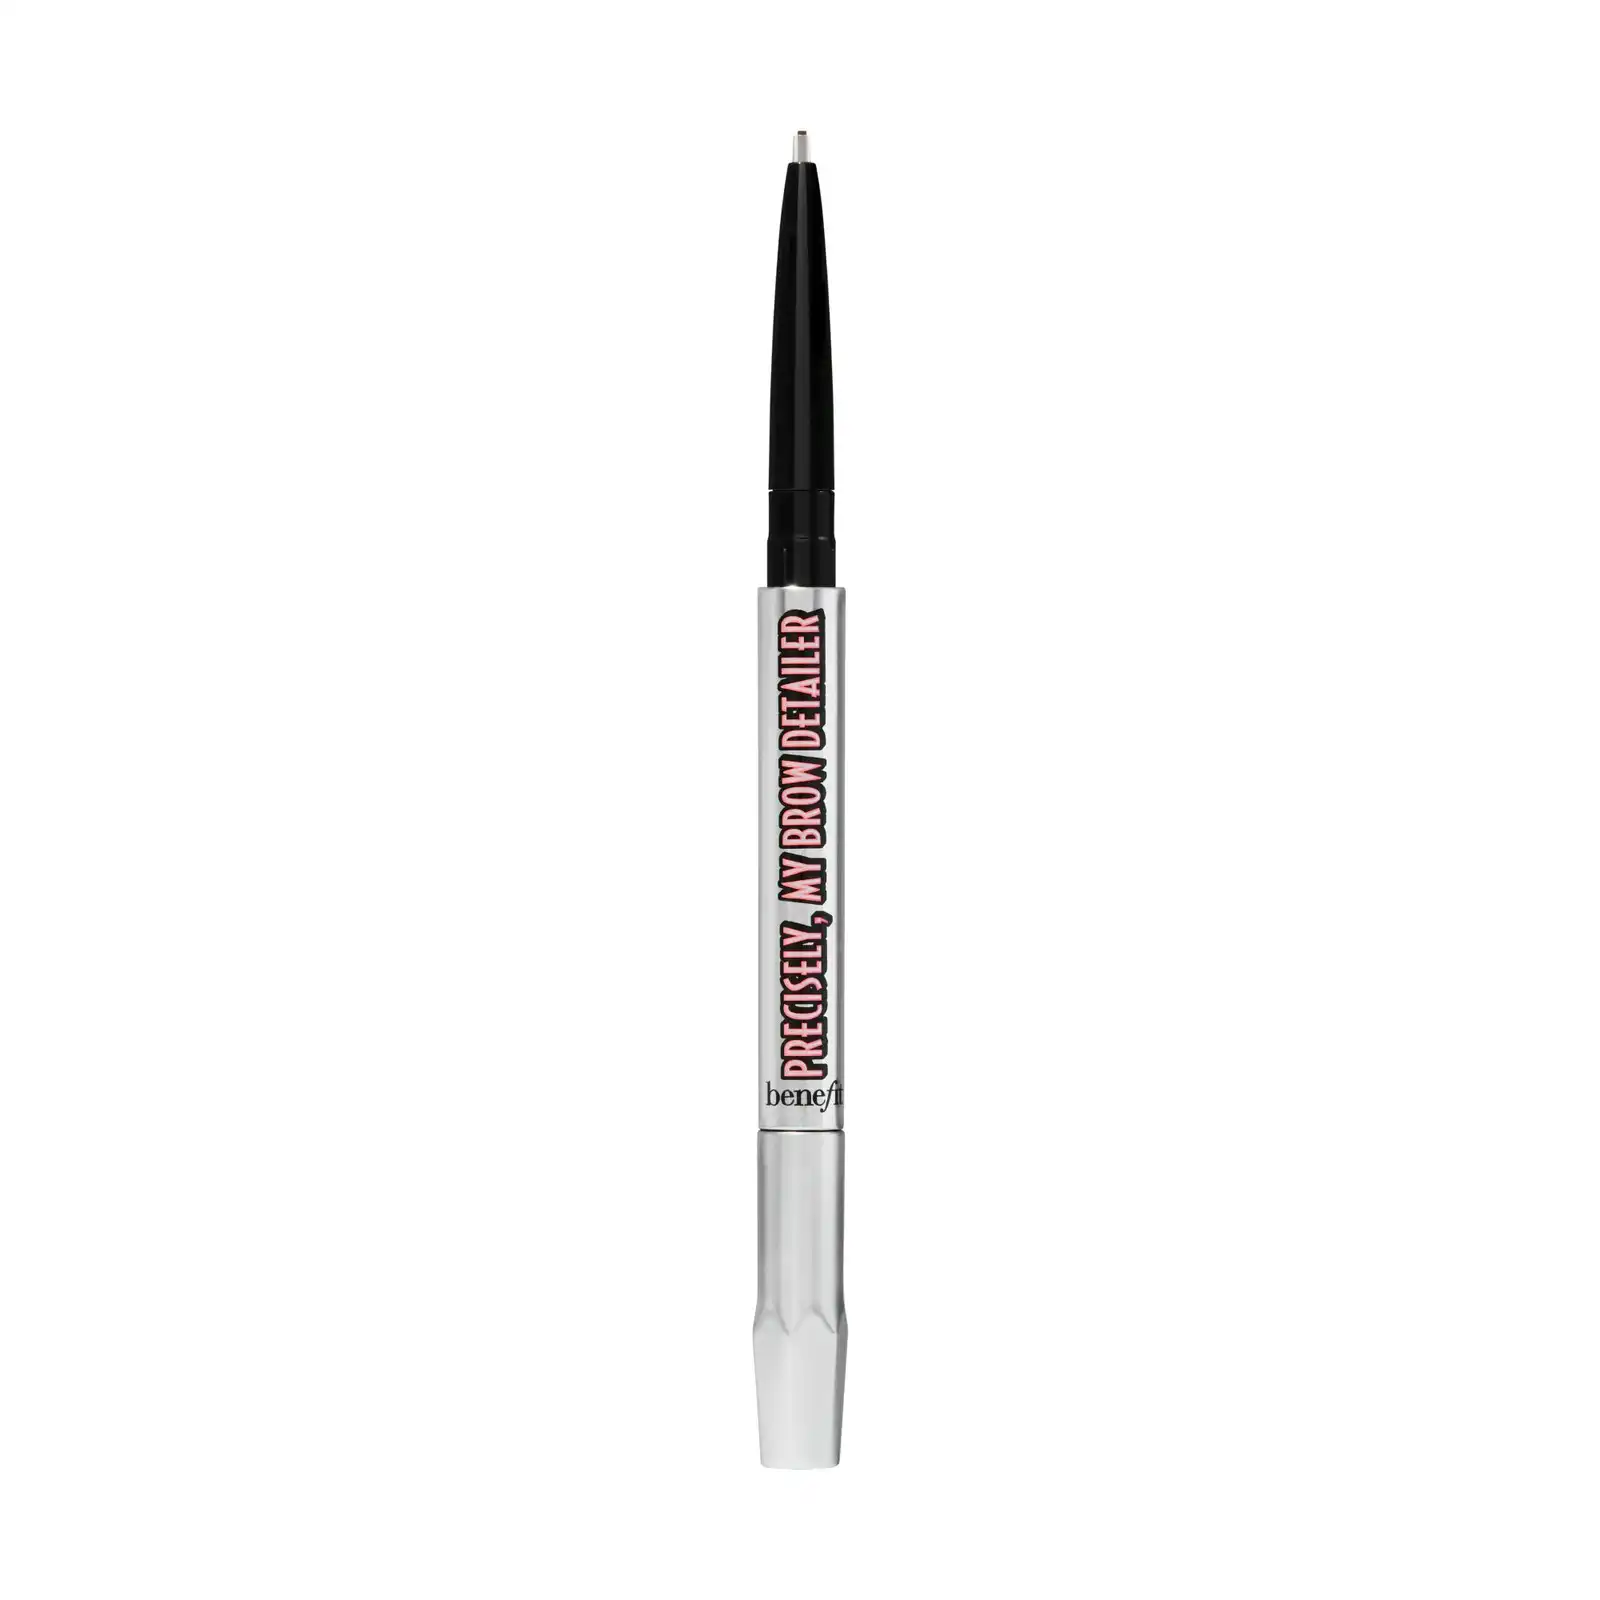 Benefit Cosmetics Precisely My Brow Detailer Shade 02